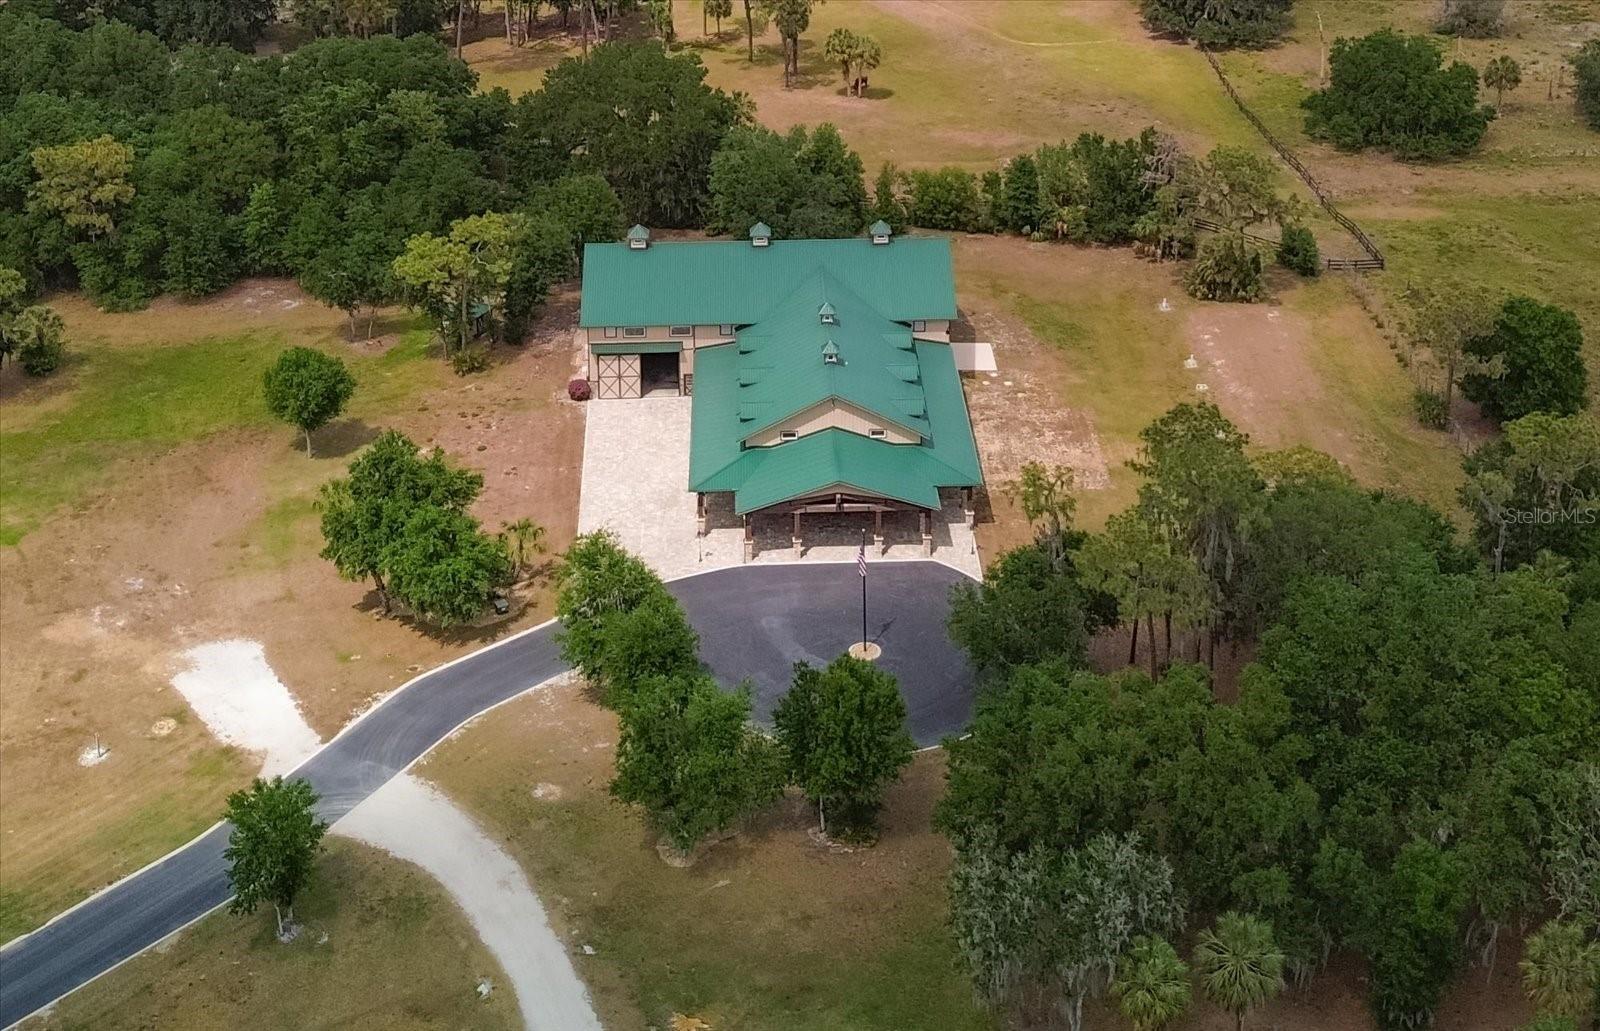 Equipment Building and RV Pad with the Alafia State Park bordering this property